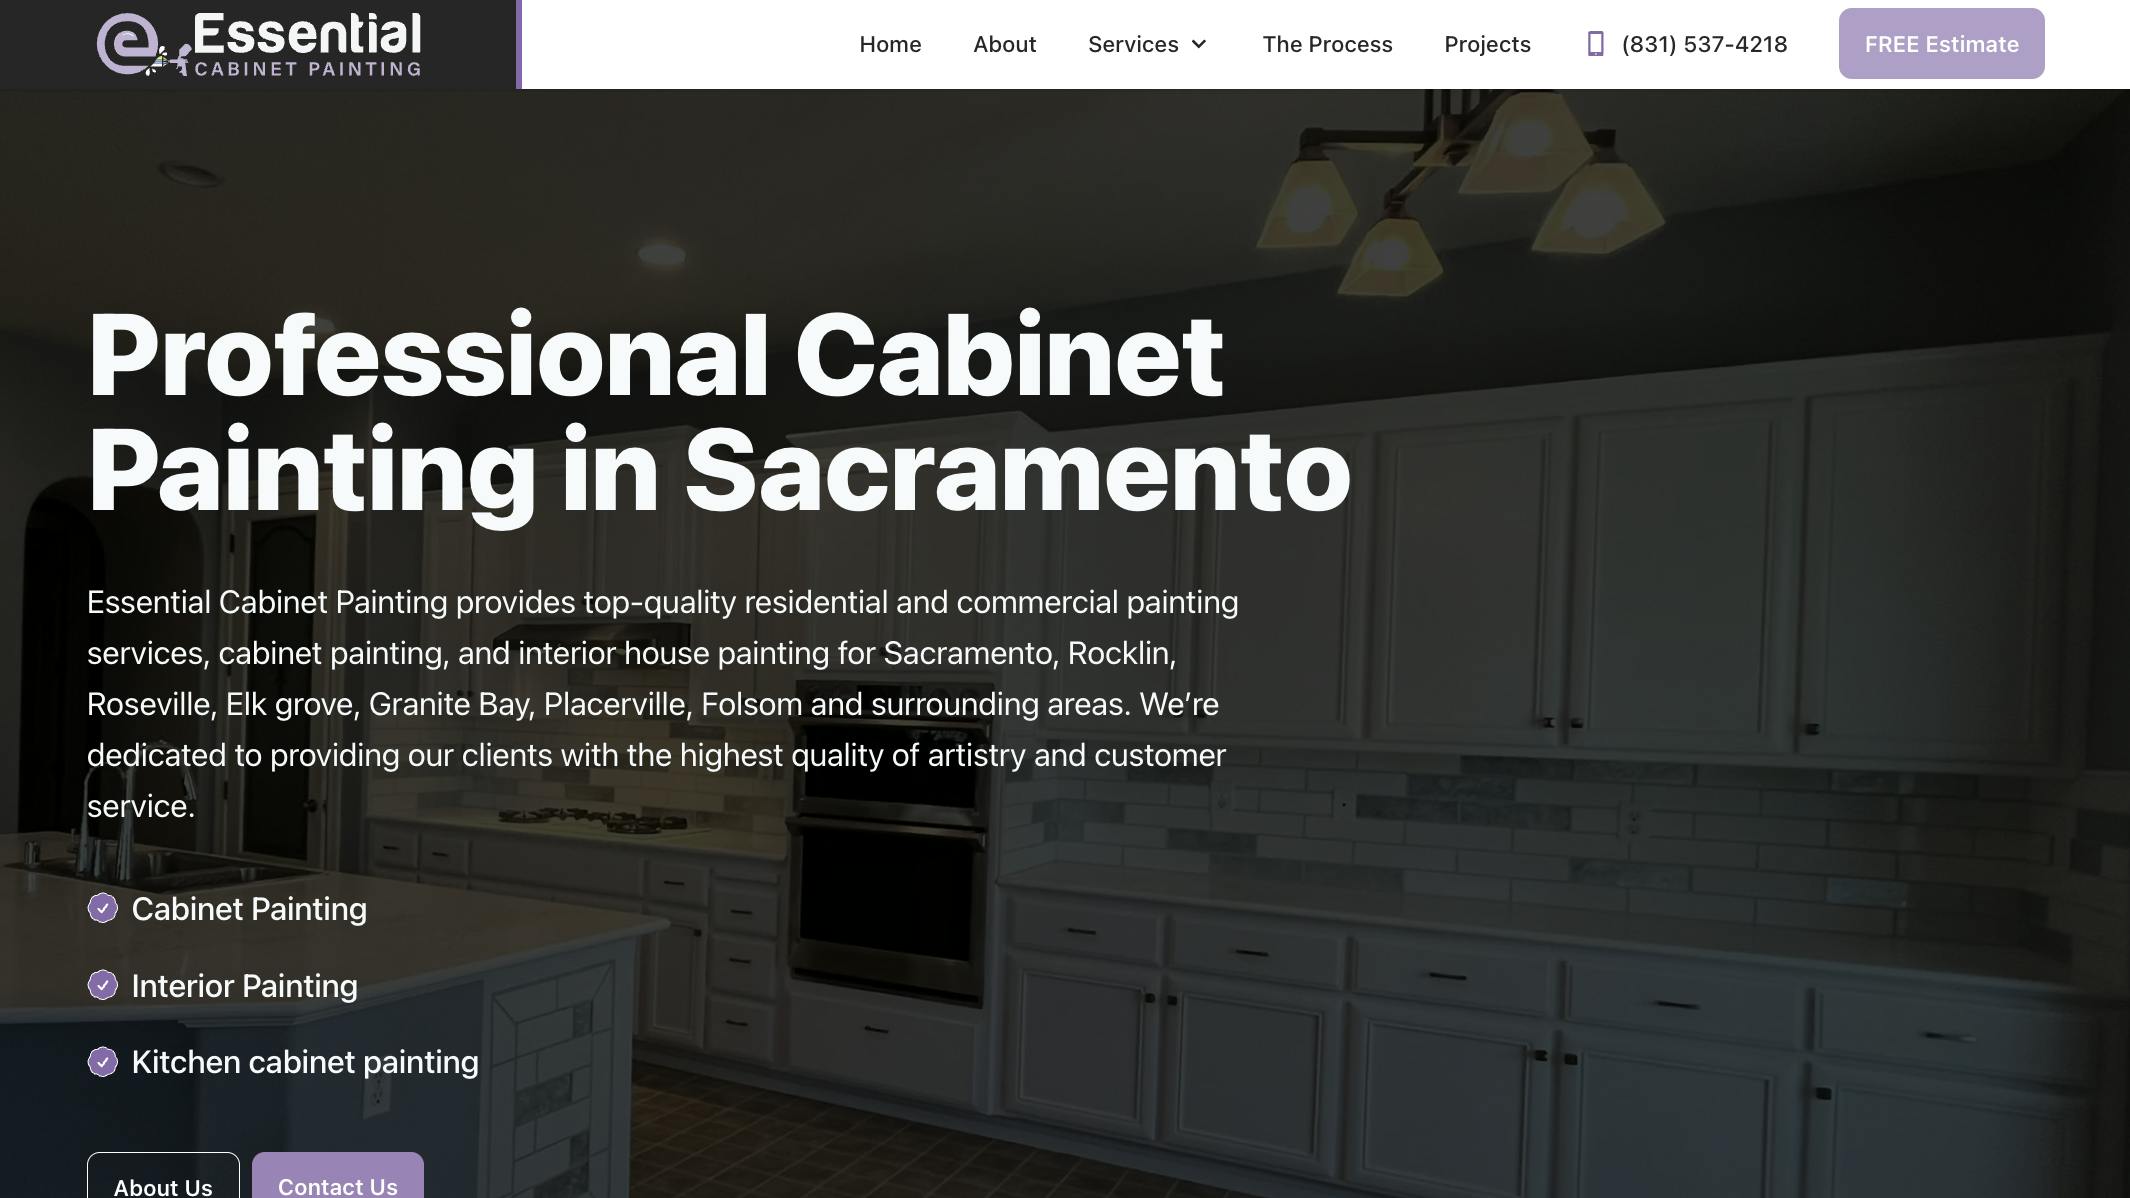 Homepage for Essential Cabinet Painting featuring a large banner with the title 'Professional Cabinet Painting in Sacramento.' Descriptive text beneath mentions residential and commercial services in various locations. The image shows a modern kitchen with elegantly painted cabinets and chic lighting. Icons for specific services and navigation buttons for more information and contact details are also displayed.